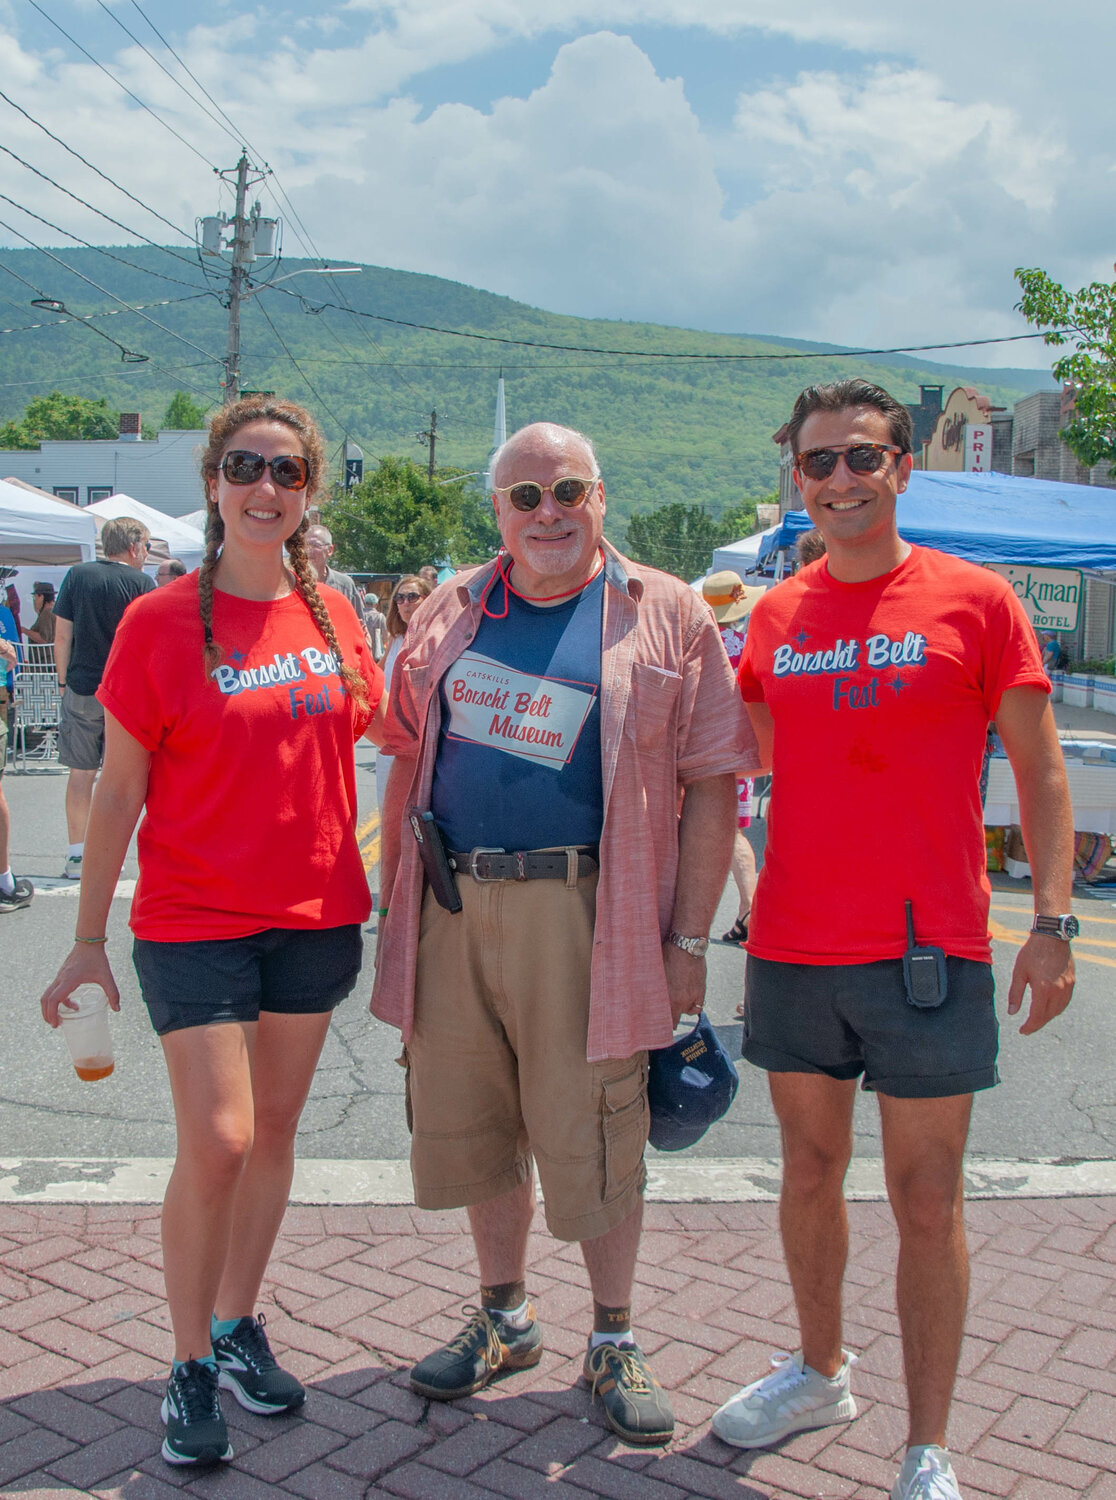 Borscht Belt Museum treasurer Peter Alan Chester with festival volunteers Julie and Chris were among the thousands schvitzing and celebrating in Ellenville, NY last weekend.